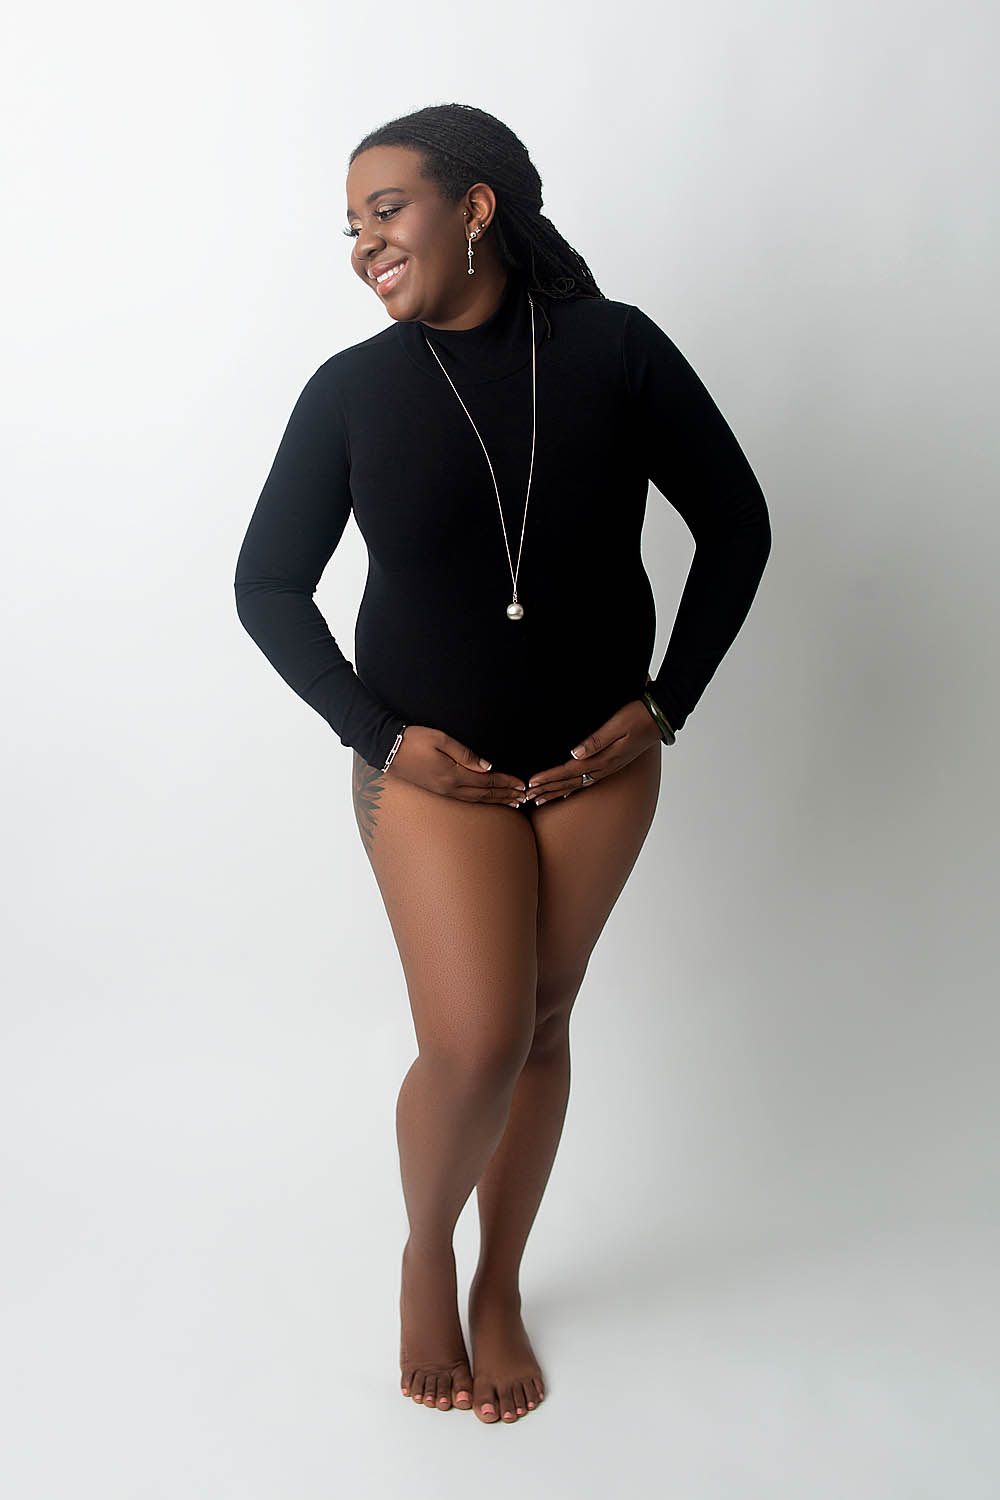 black women wearing a black bodysuit is smiling and posed at a davie photography studio that also does newborn photography near cooper city